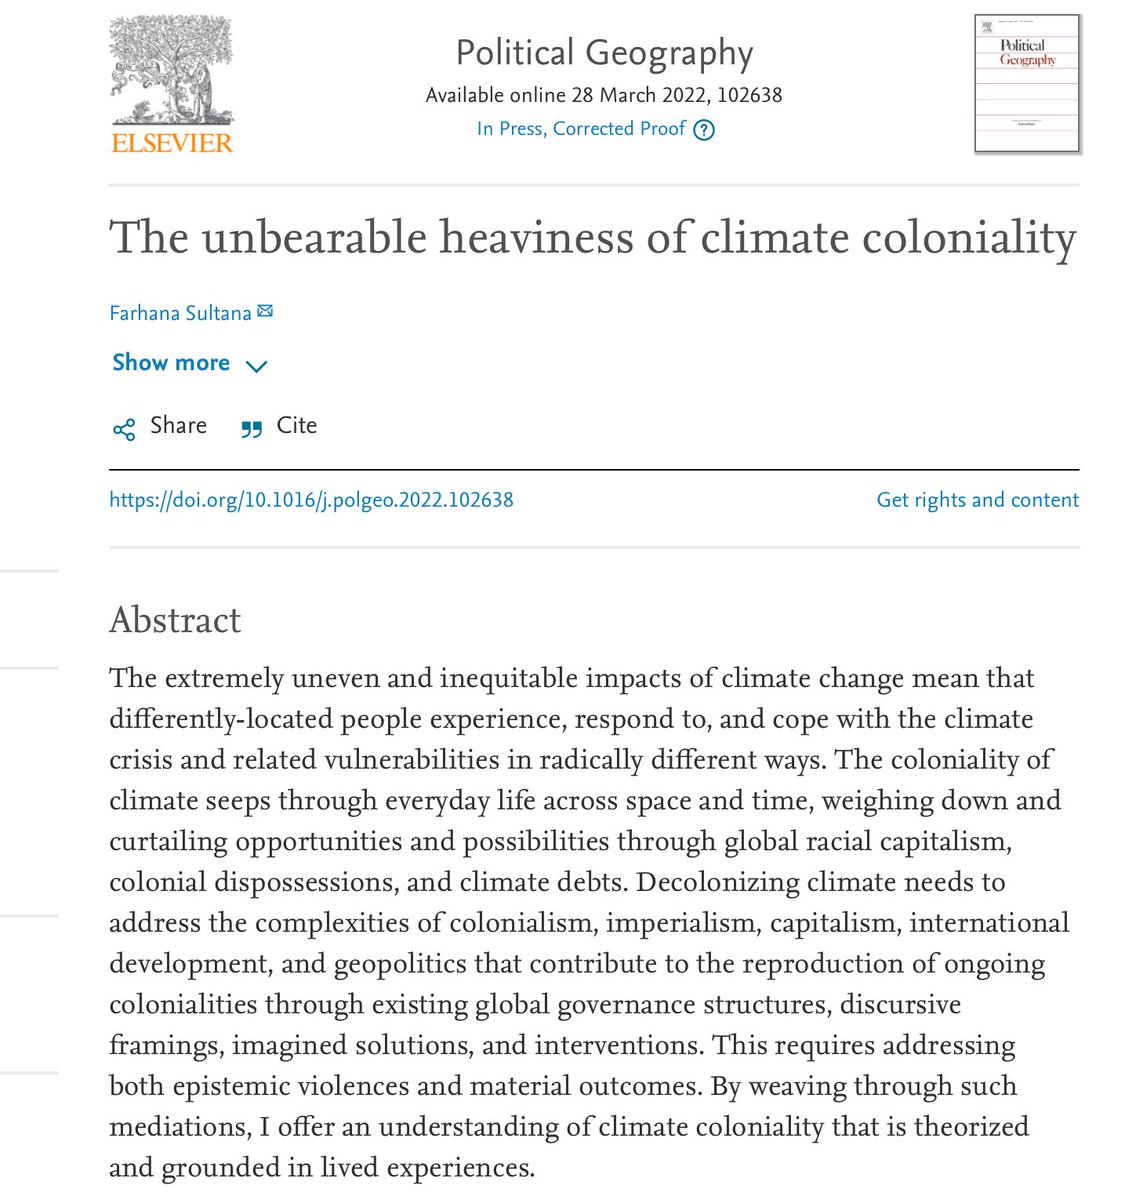 Here is the long-awaited & years-in-the-making paper on #ClimateColoniality! It was my plenary lecture for @Pol_Geog_Jl at the 2022 @theAAG conference. Access the text here: authors.elsevier.com/a/1evla_Lupus%… #ClimateCrisis #ClimateJustice #Coloniality #Decolonization